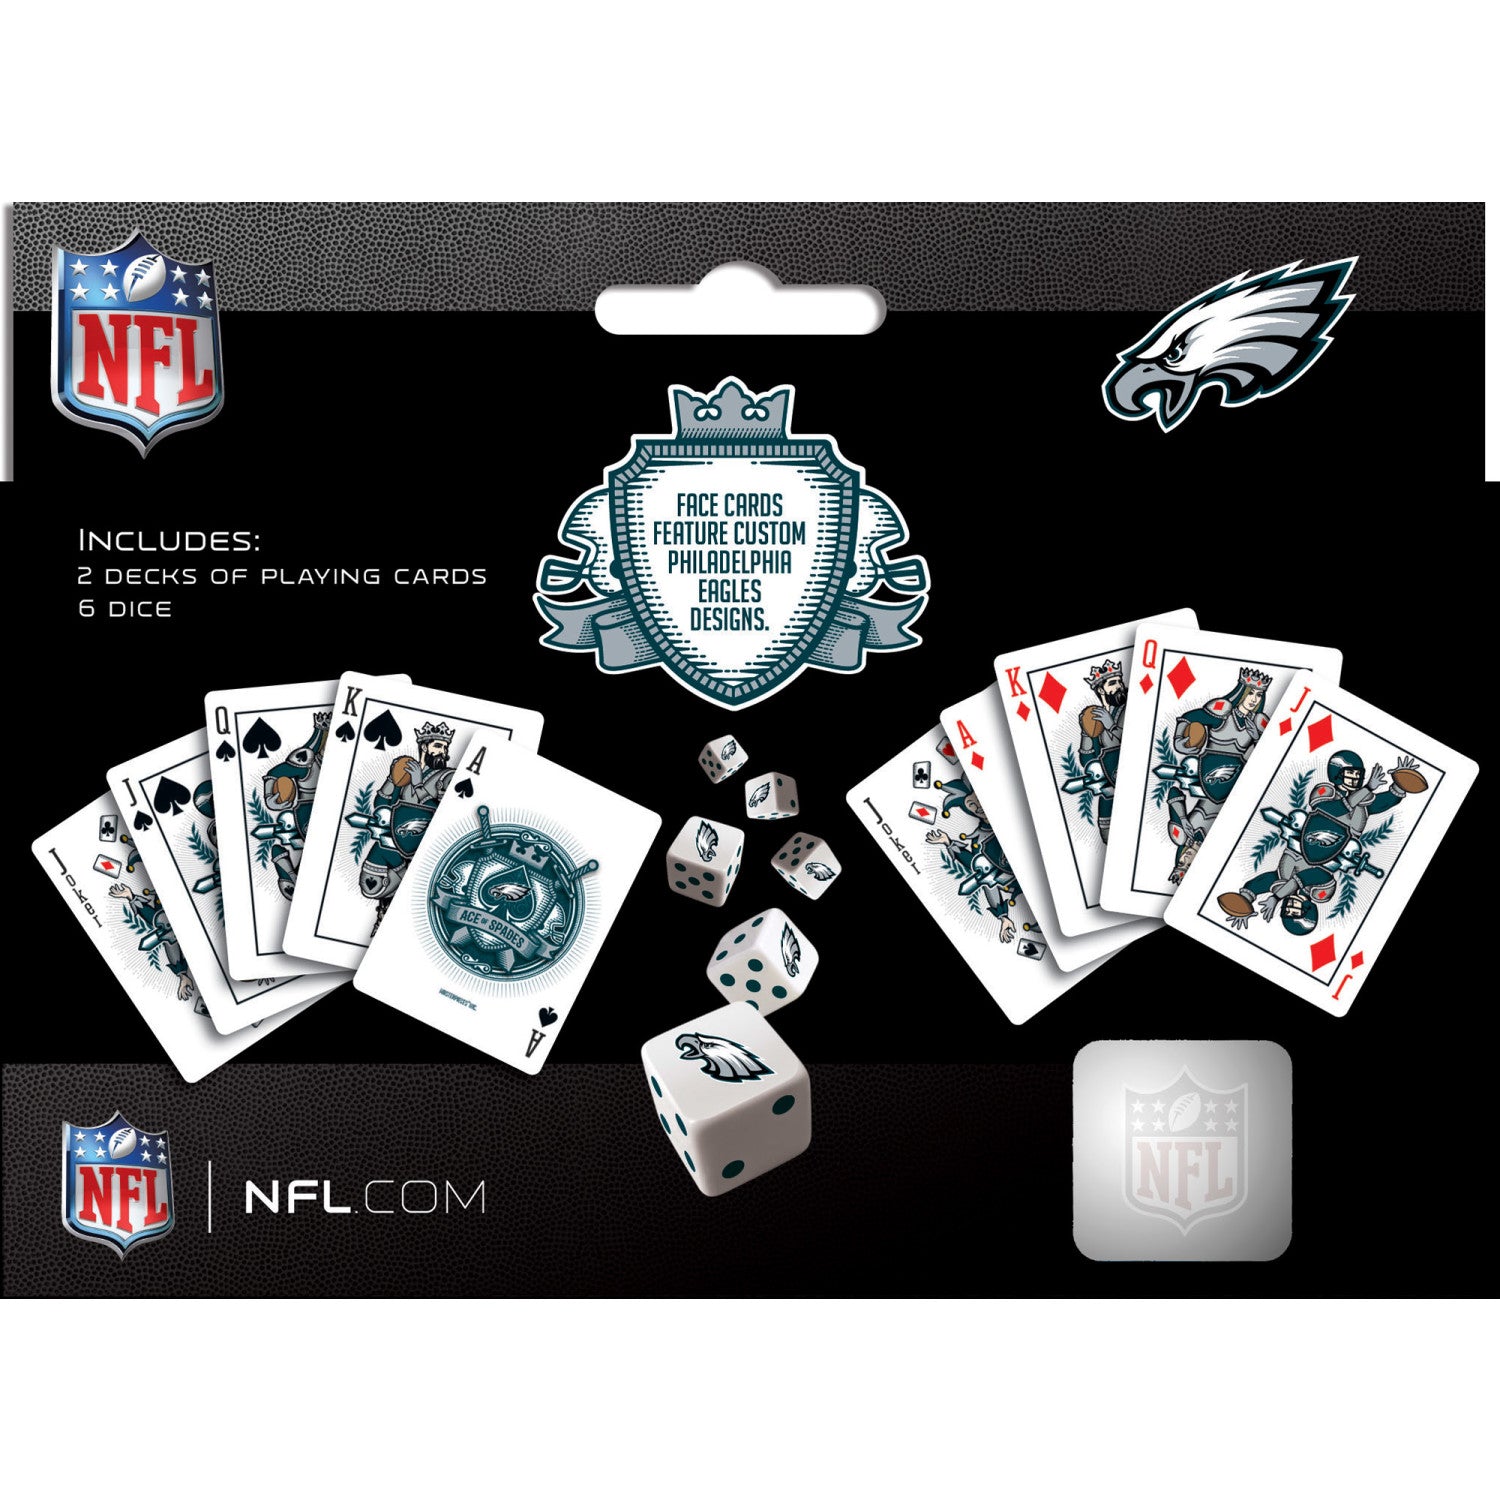 Philadelphia Eagles - 2-Pack Playing Cards & Dice Set